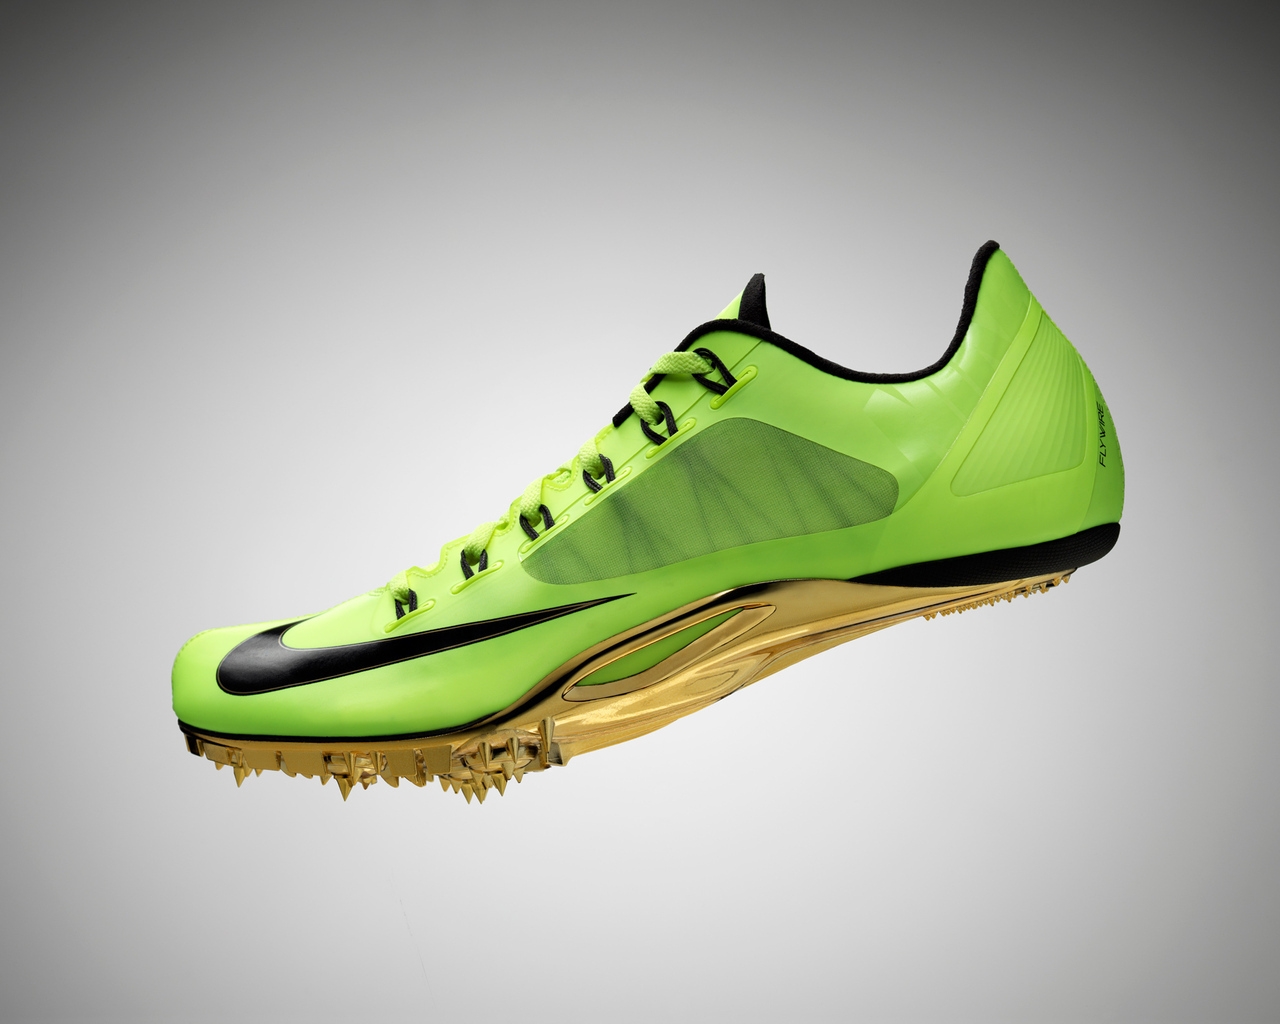 Nike Flywire Shoes for 1280 x 1024 resolution